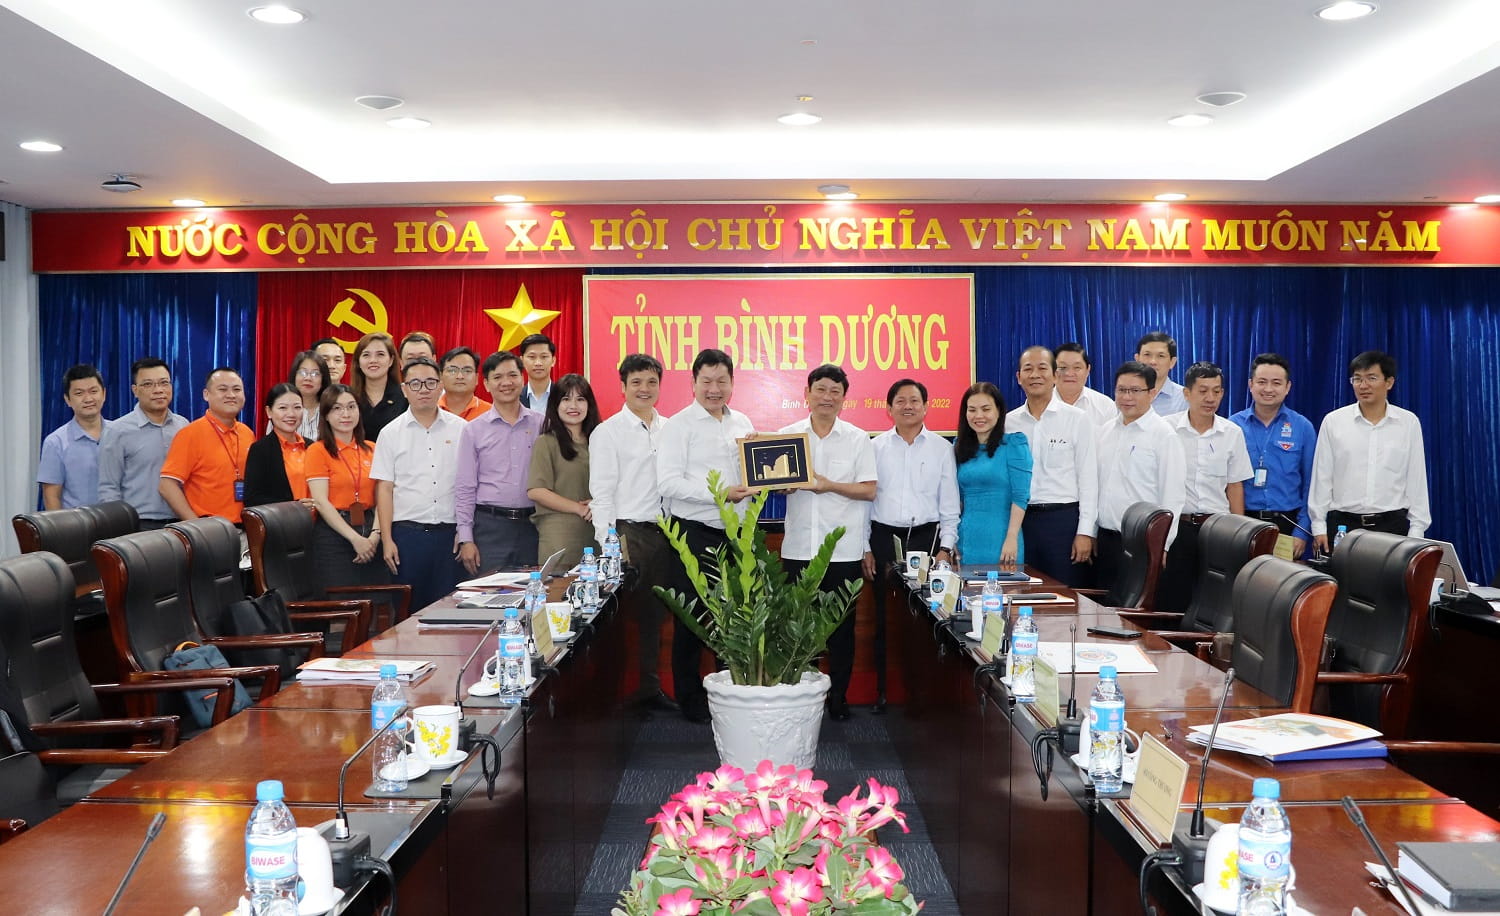 FPT management team gave souvenir gifts to Binh Duong provincial leaders